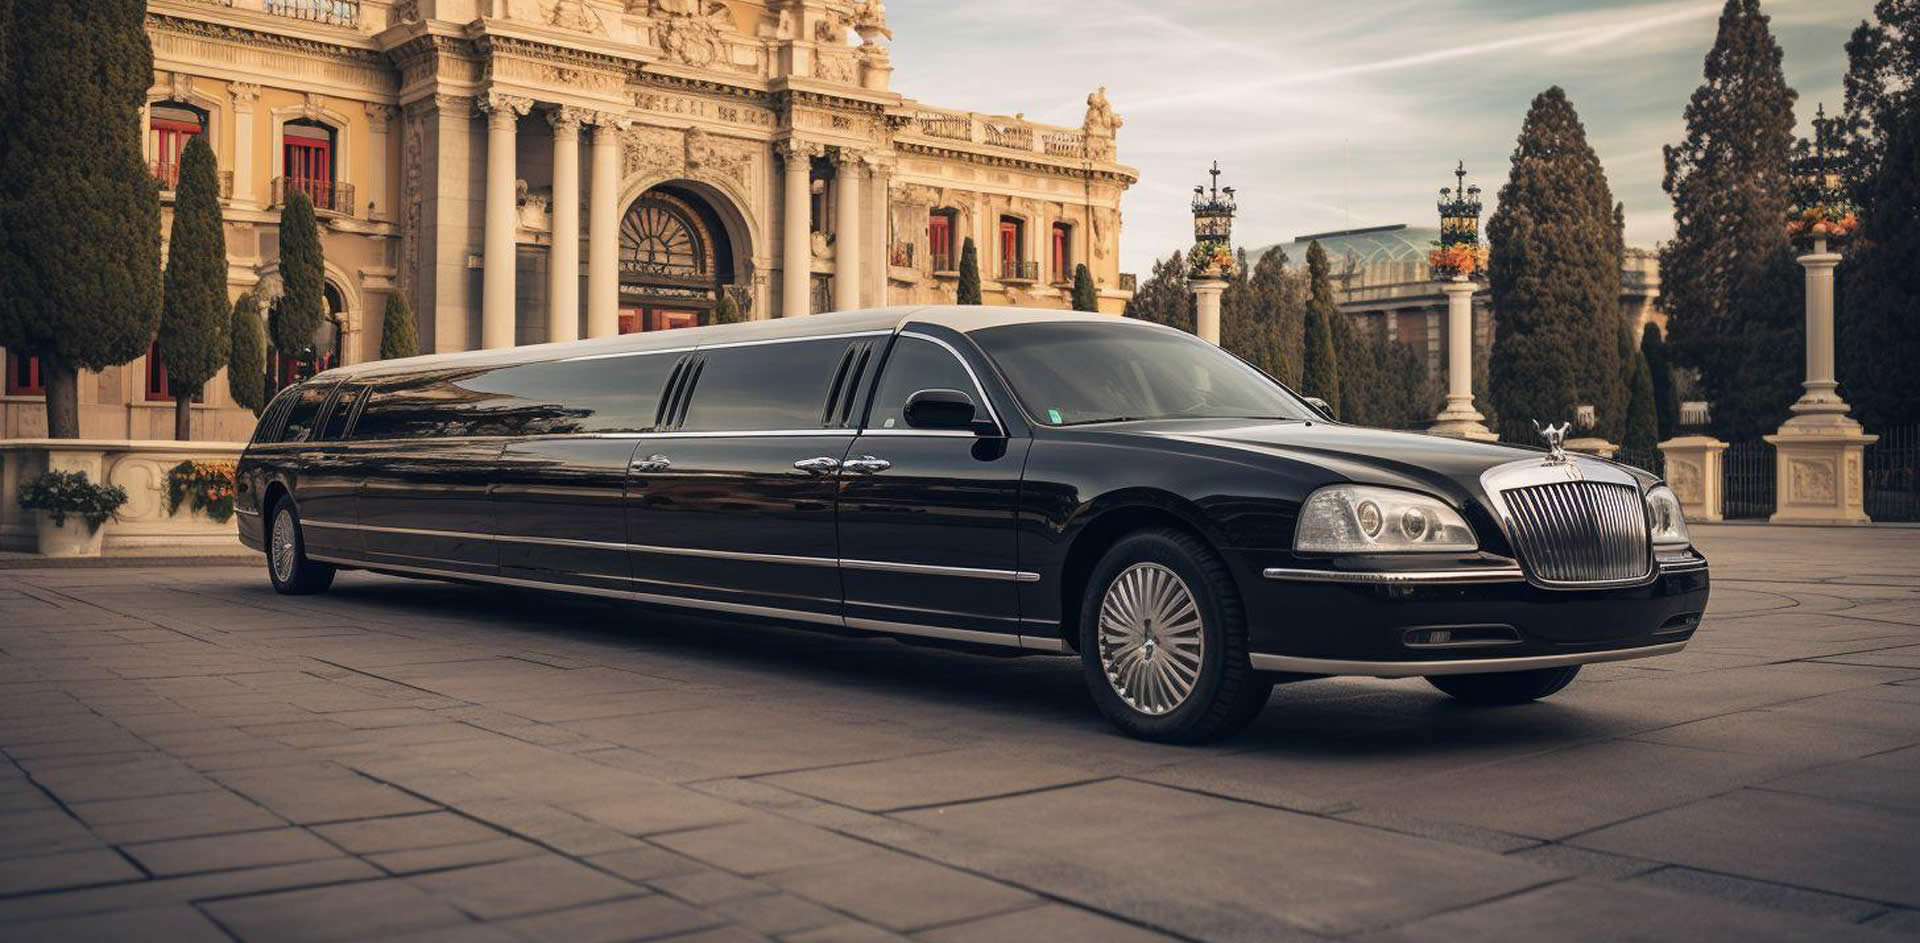 A long black limousine parked in front of a building